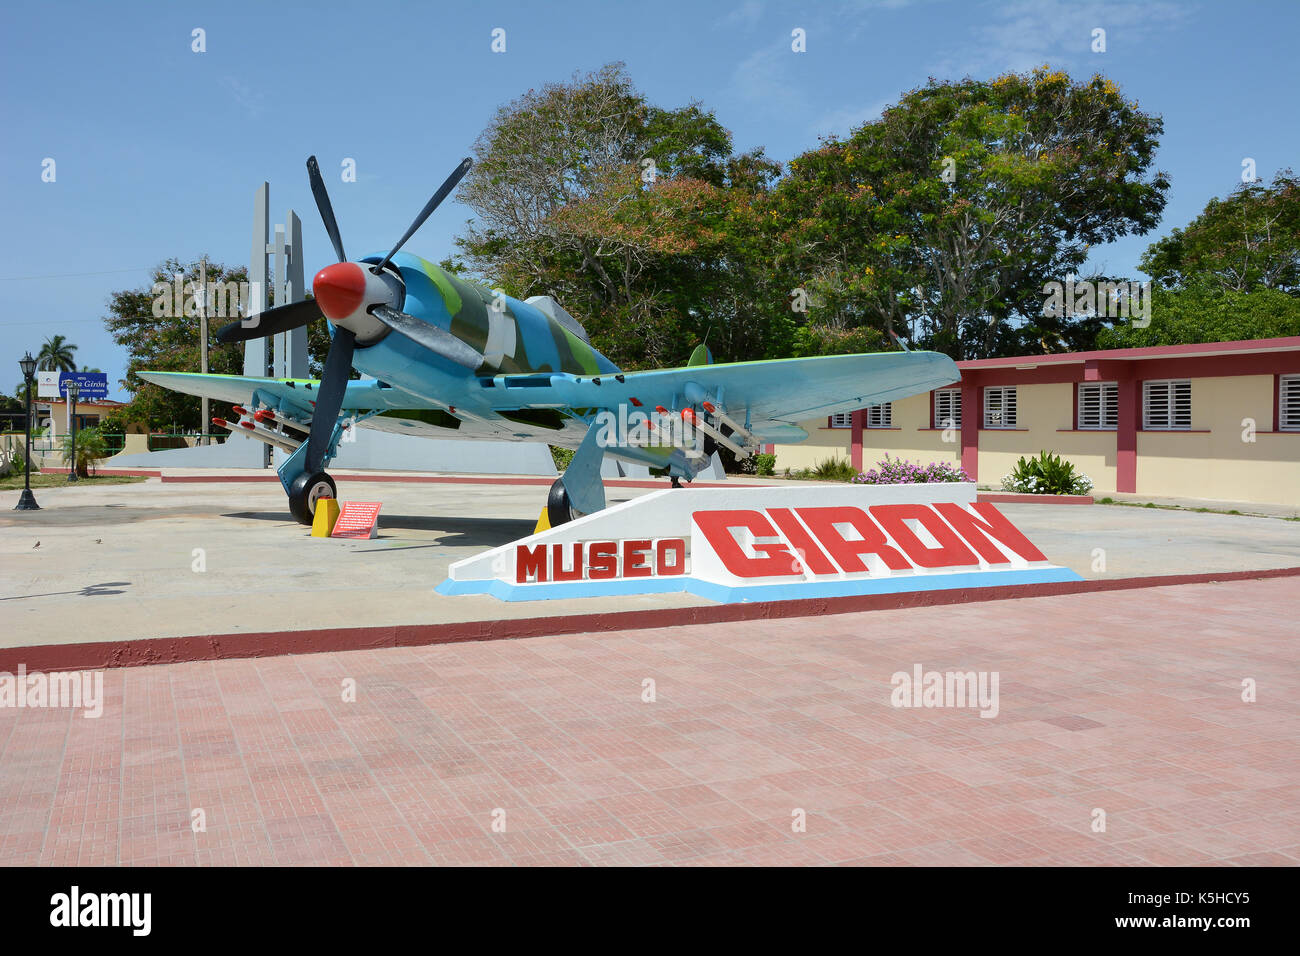 PLAYA GIRON, CUBA - JULY 24, 2016: The Bay of Pigs Museum. Vintage plane in front of the museum dedicated to the failed 1961 invasion. Stock Photo